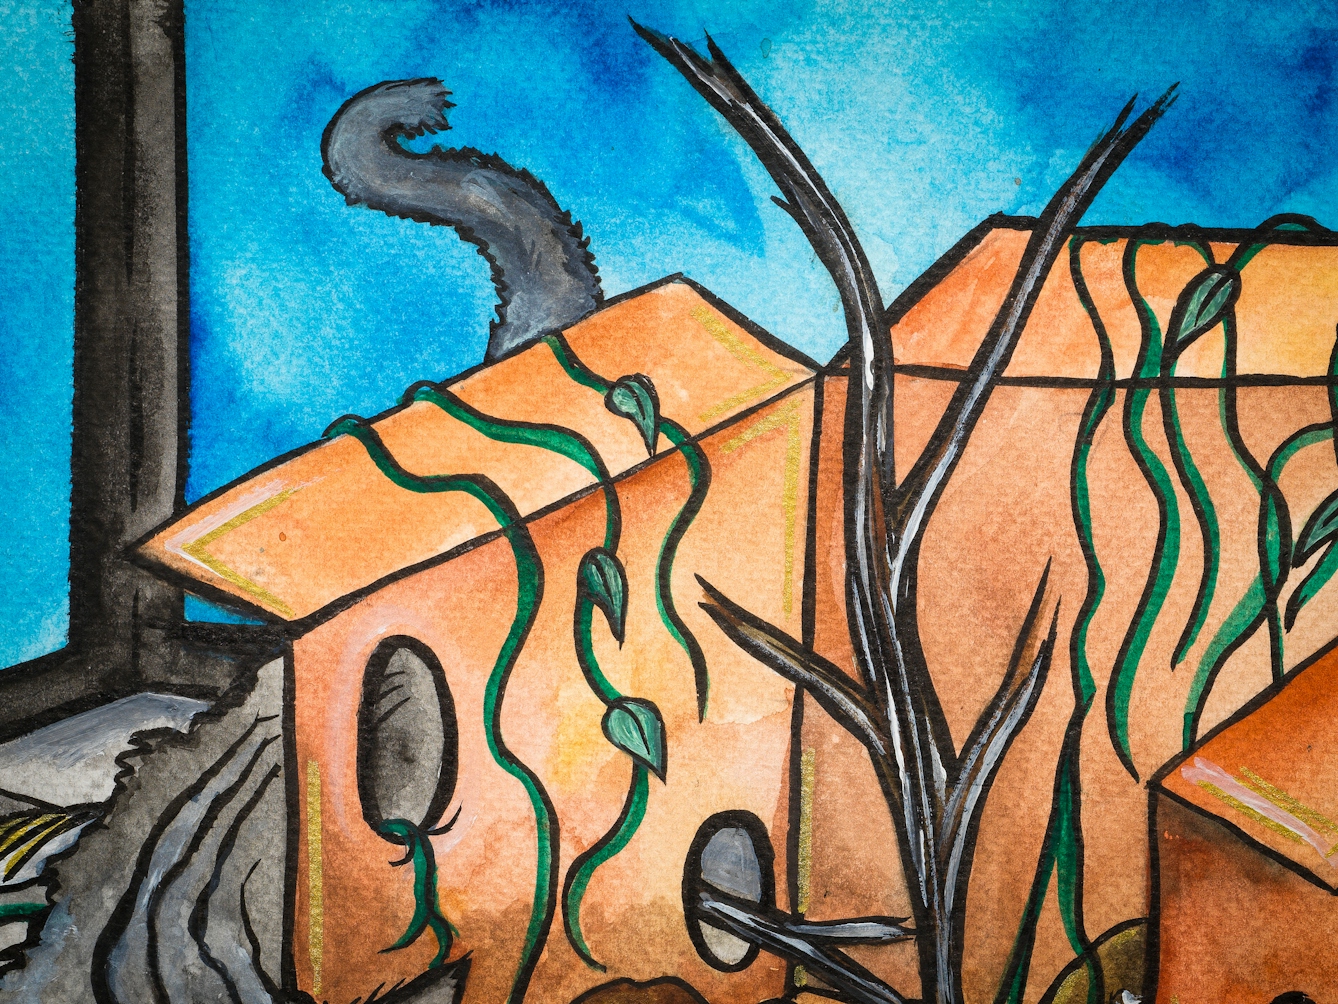 Detail from a larger colourful artwork. The artwork shows a flatpack box with several holes in it. There are tree branches and vines growing up through the box and a cat's tail extending above the box. 